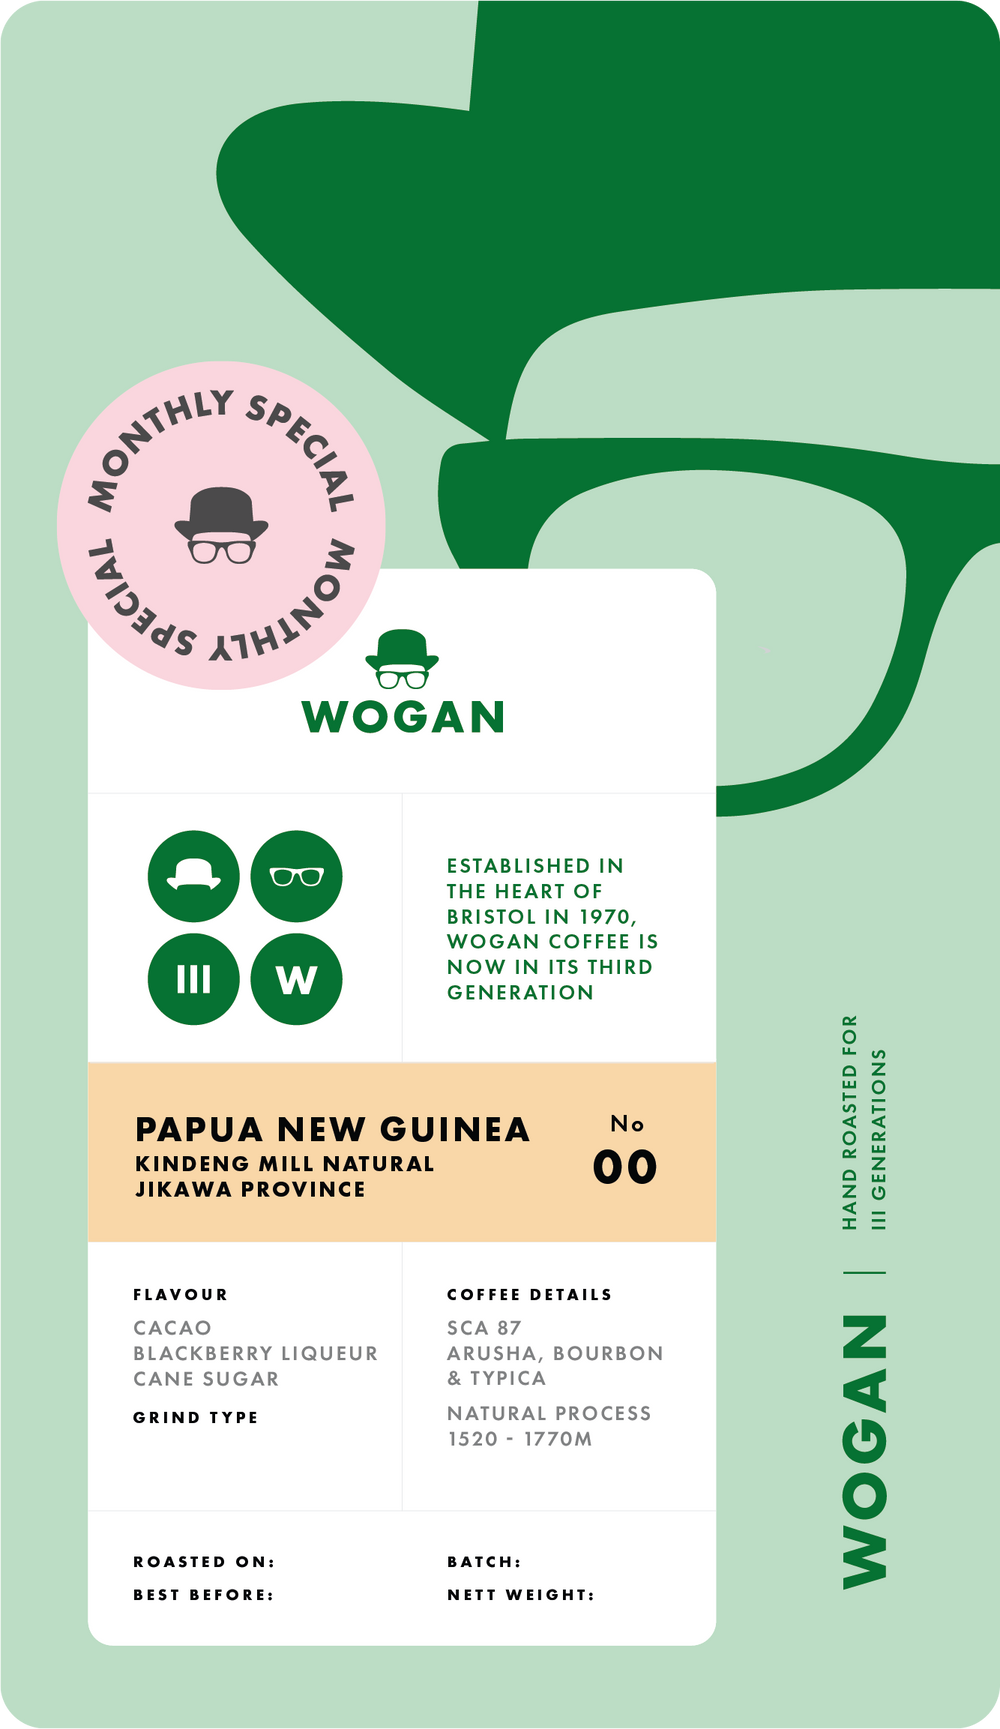 MONTHLY SPECIAL - PAPUA NEW GUINEA, KINDENG MILL, NATURAL